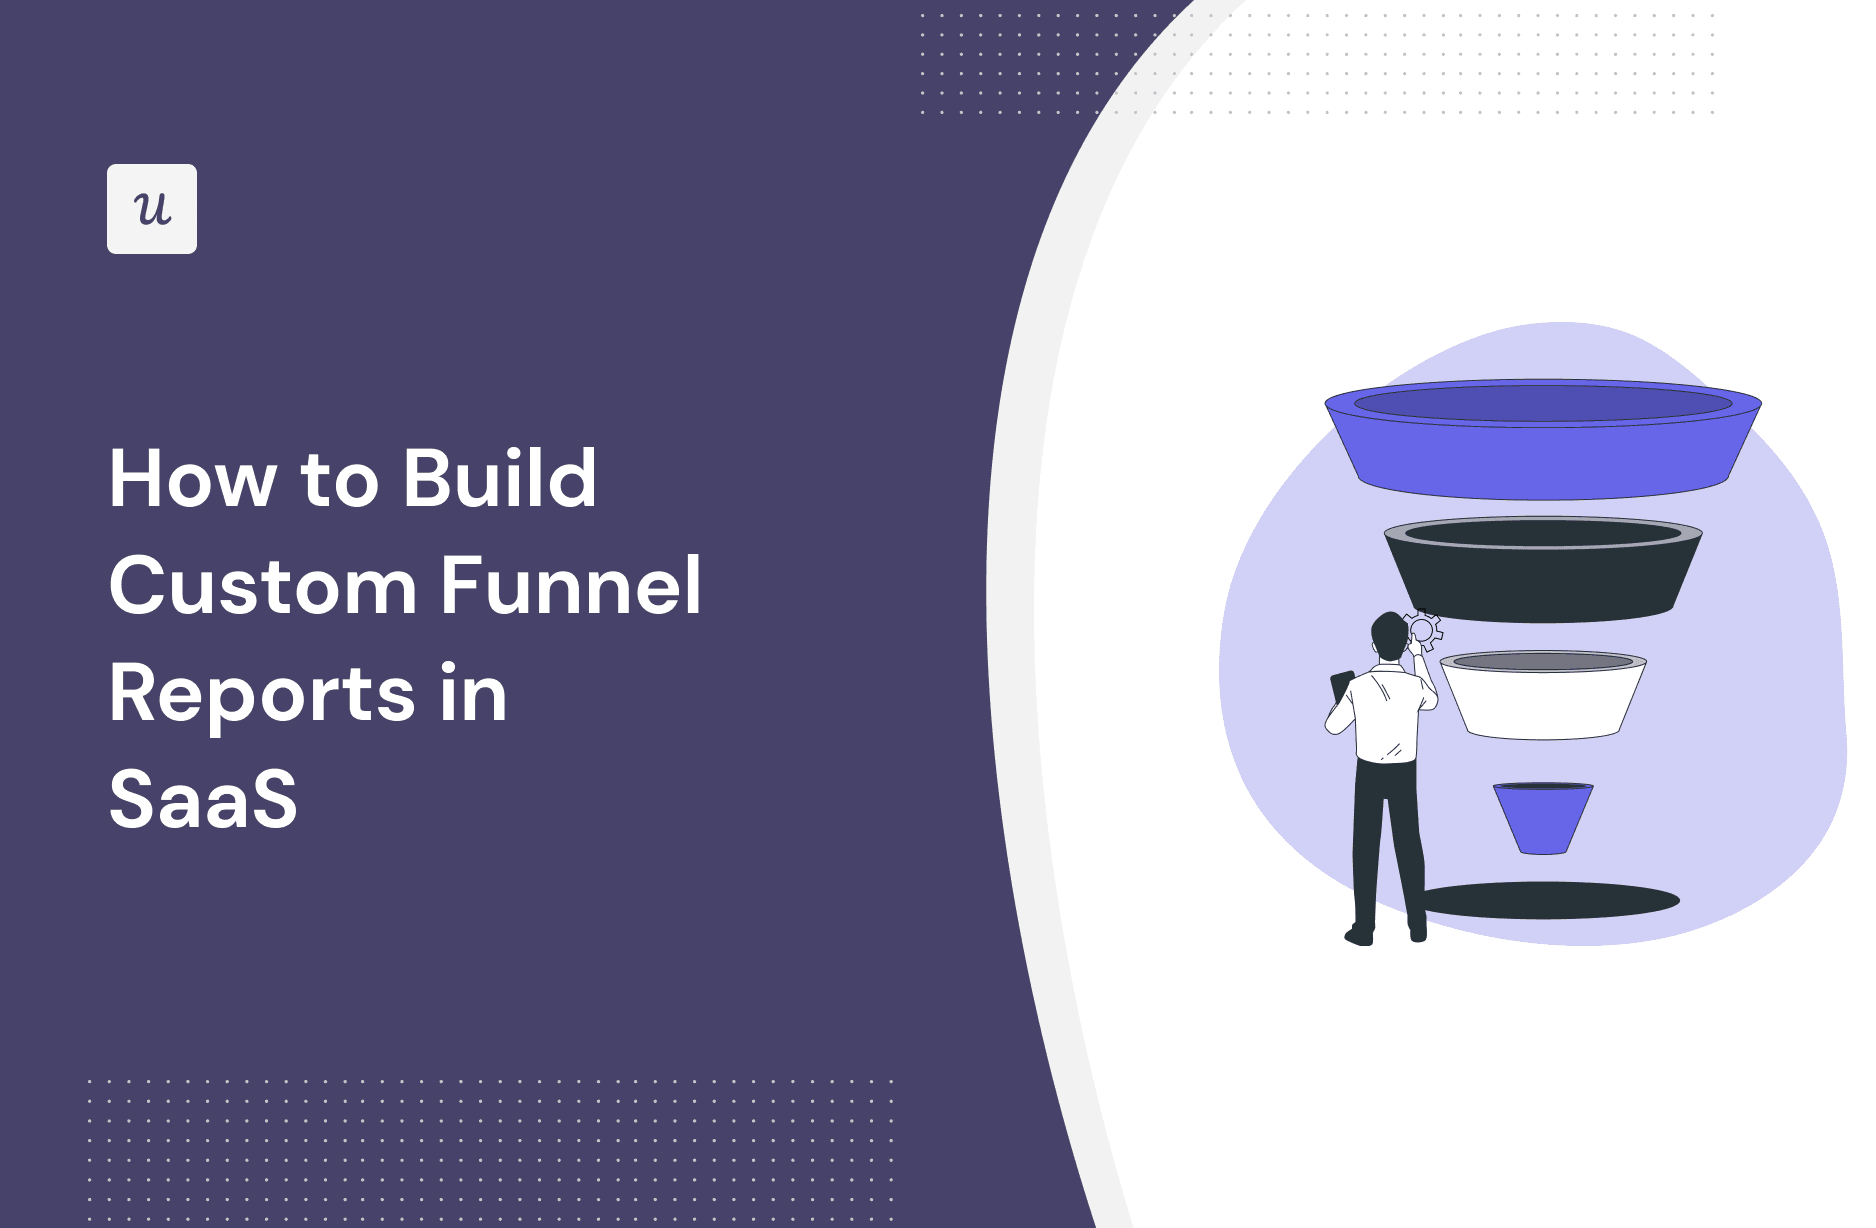 How to Build Custom Funnel Reports in SaaS cover